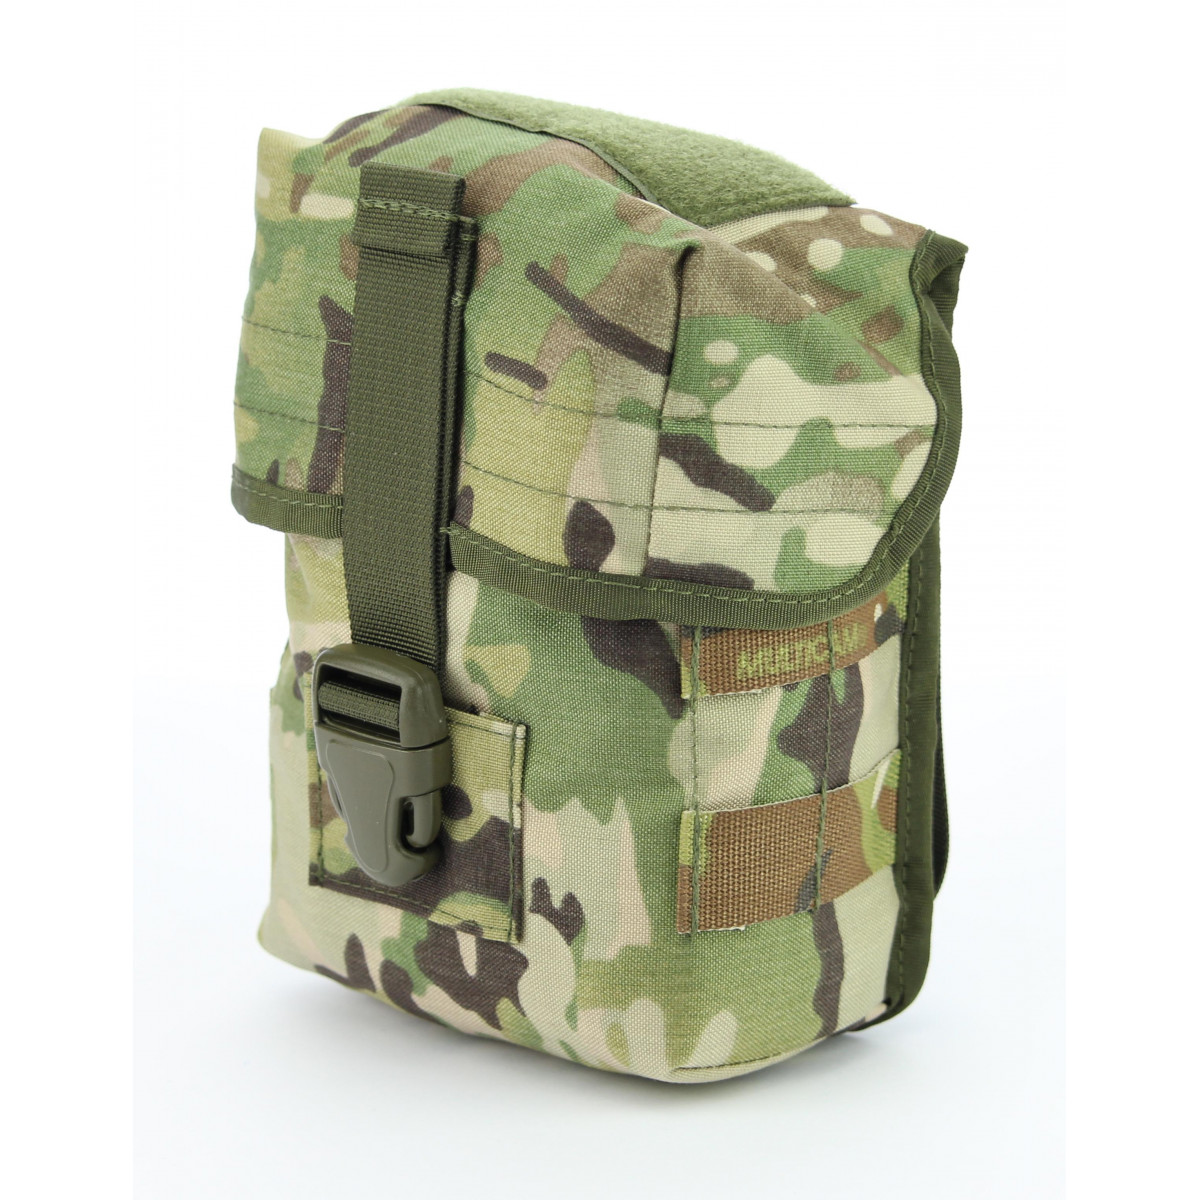 Drinking bottles pouch MOLLE